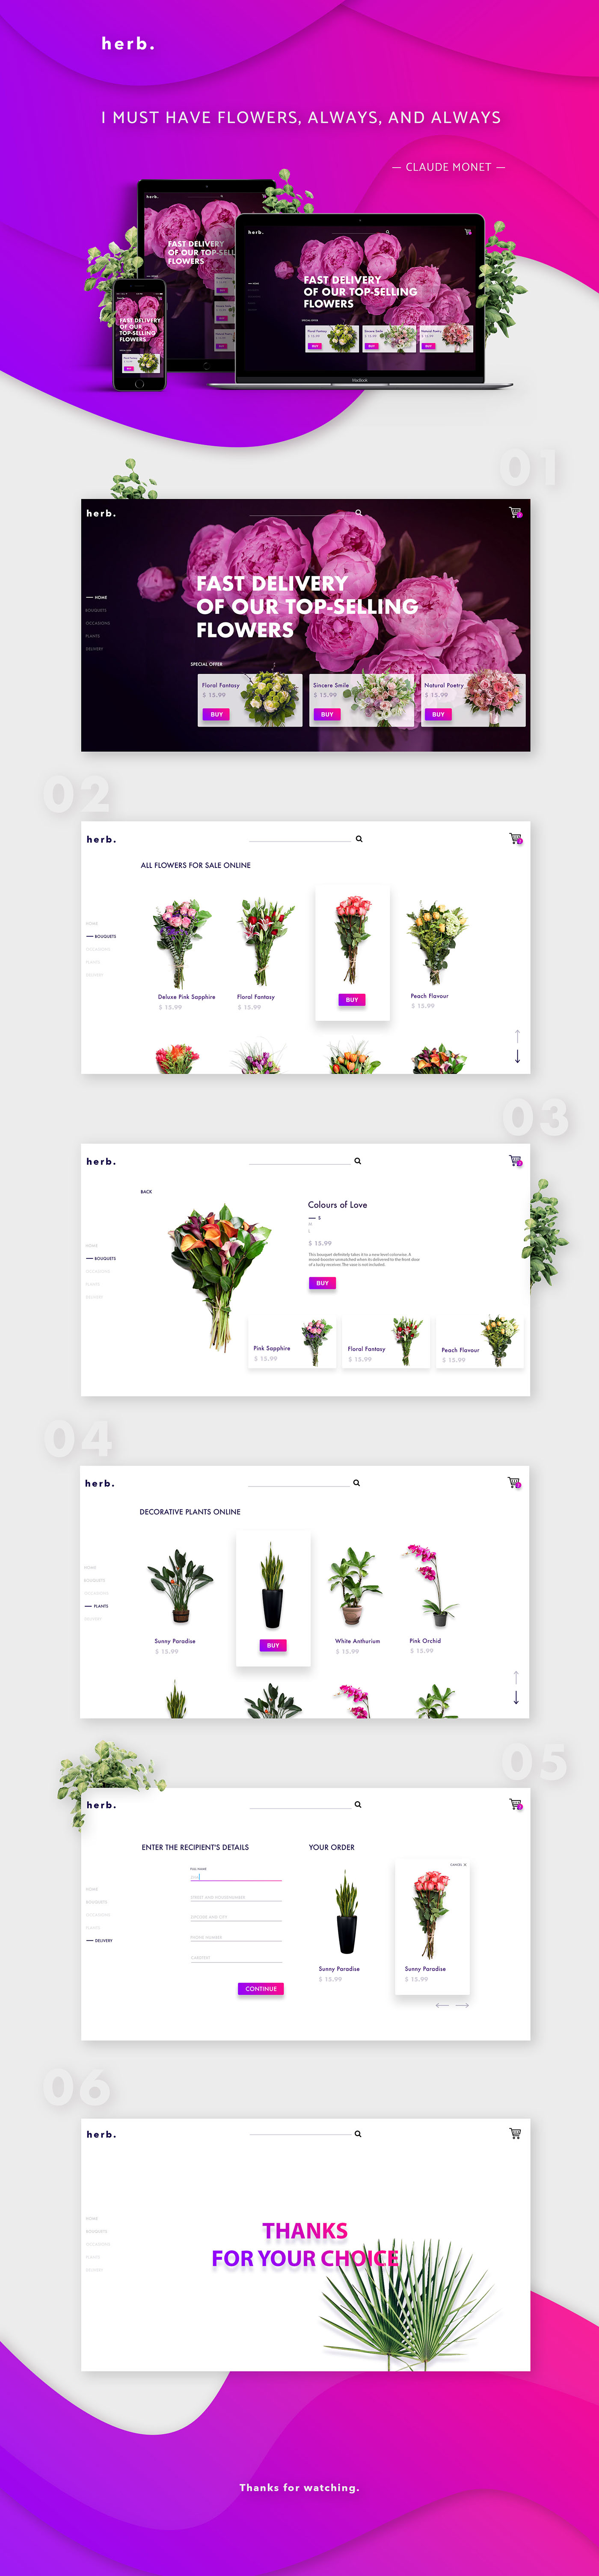 online store ux ui designe Web Design  clean colors pink Flowers UserInterface one page scroll